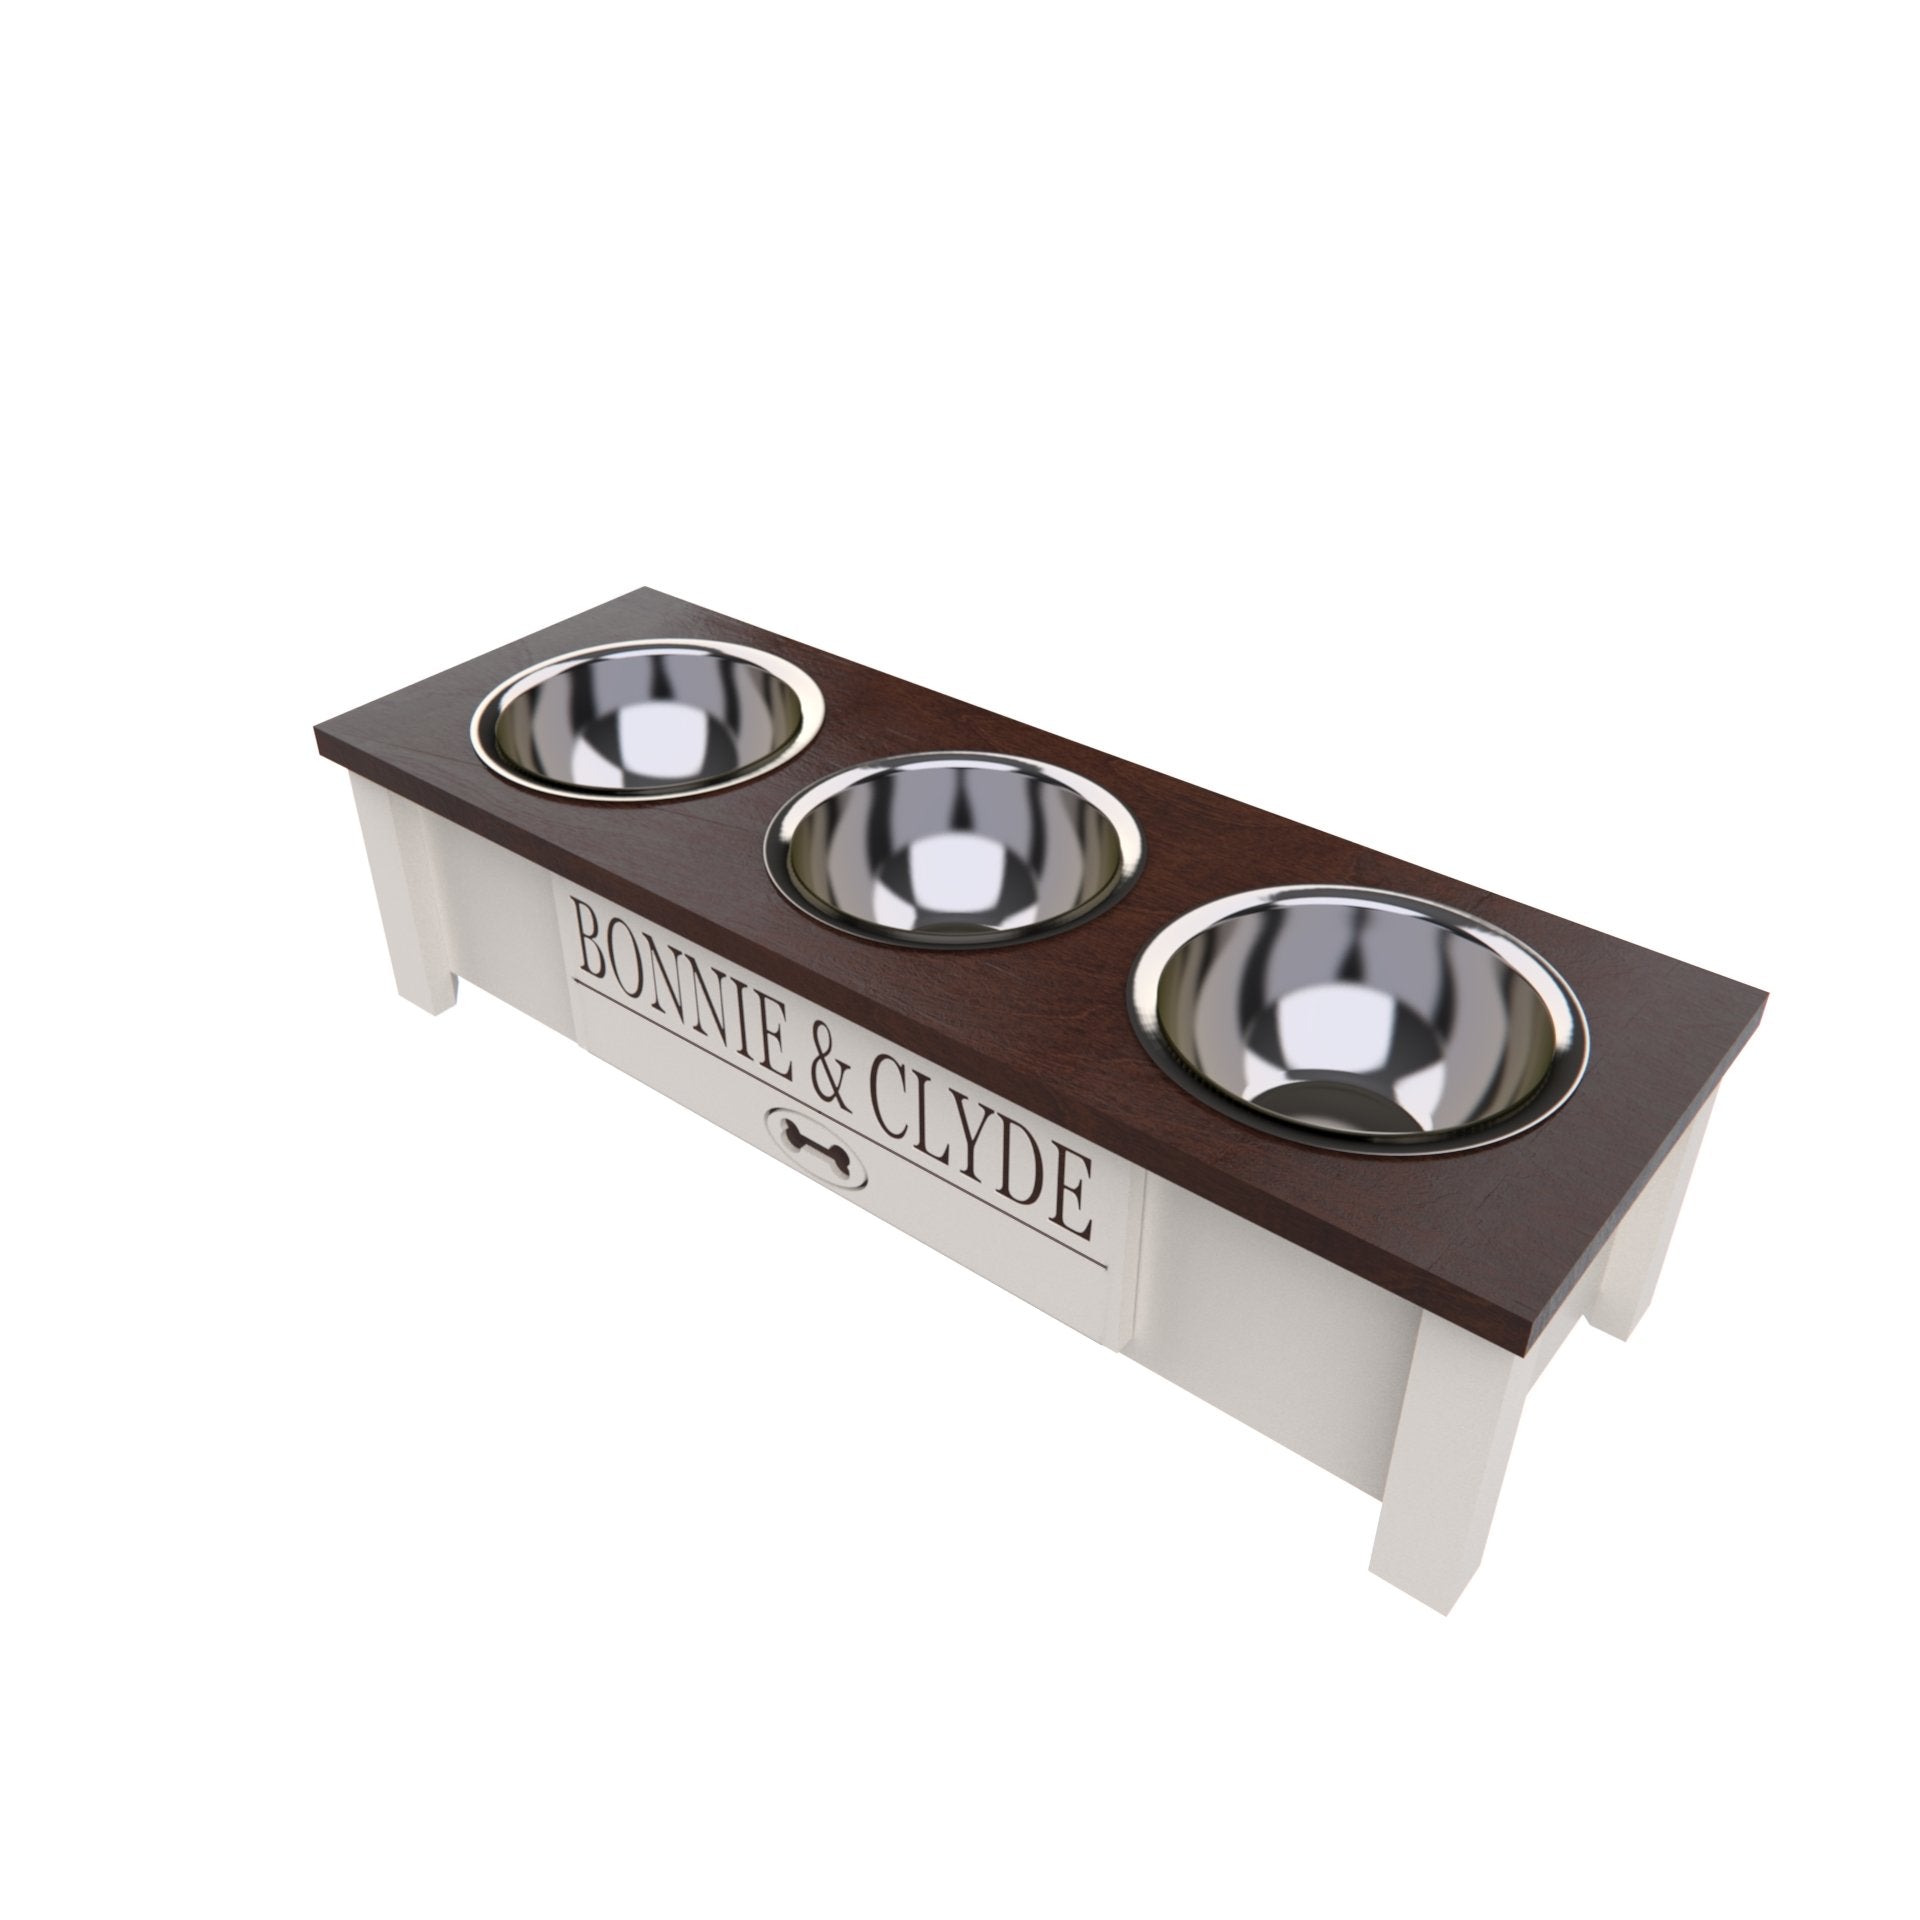 Personalized 3 Bowl Elevated Dog Feeder in Dark Walnut - GrooveThis Woodshop - GT006DW-S